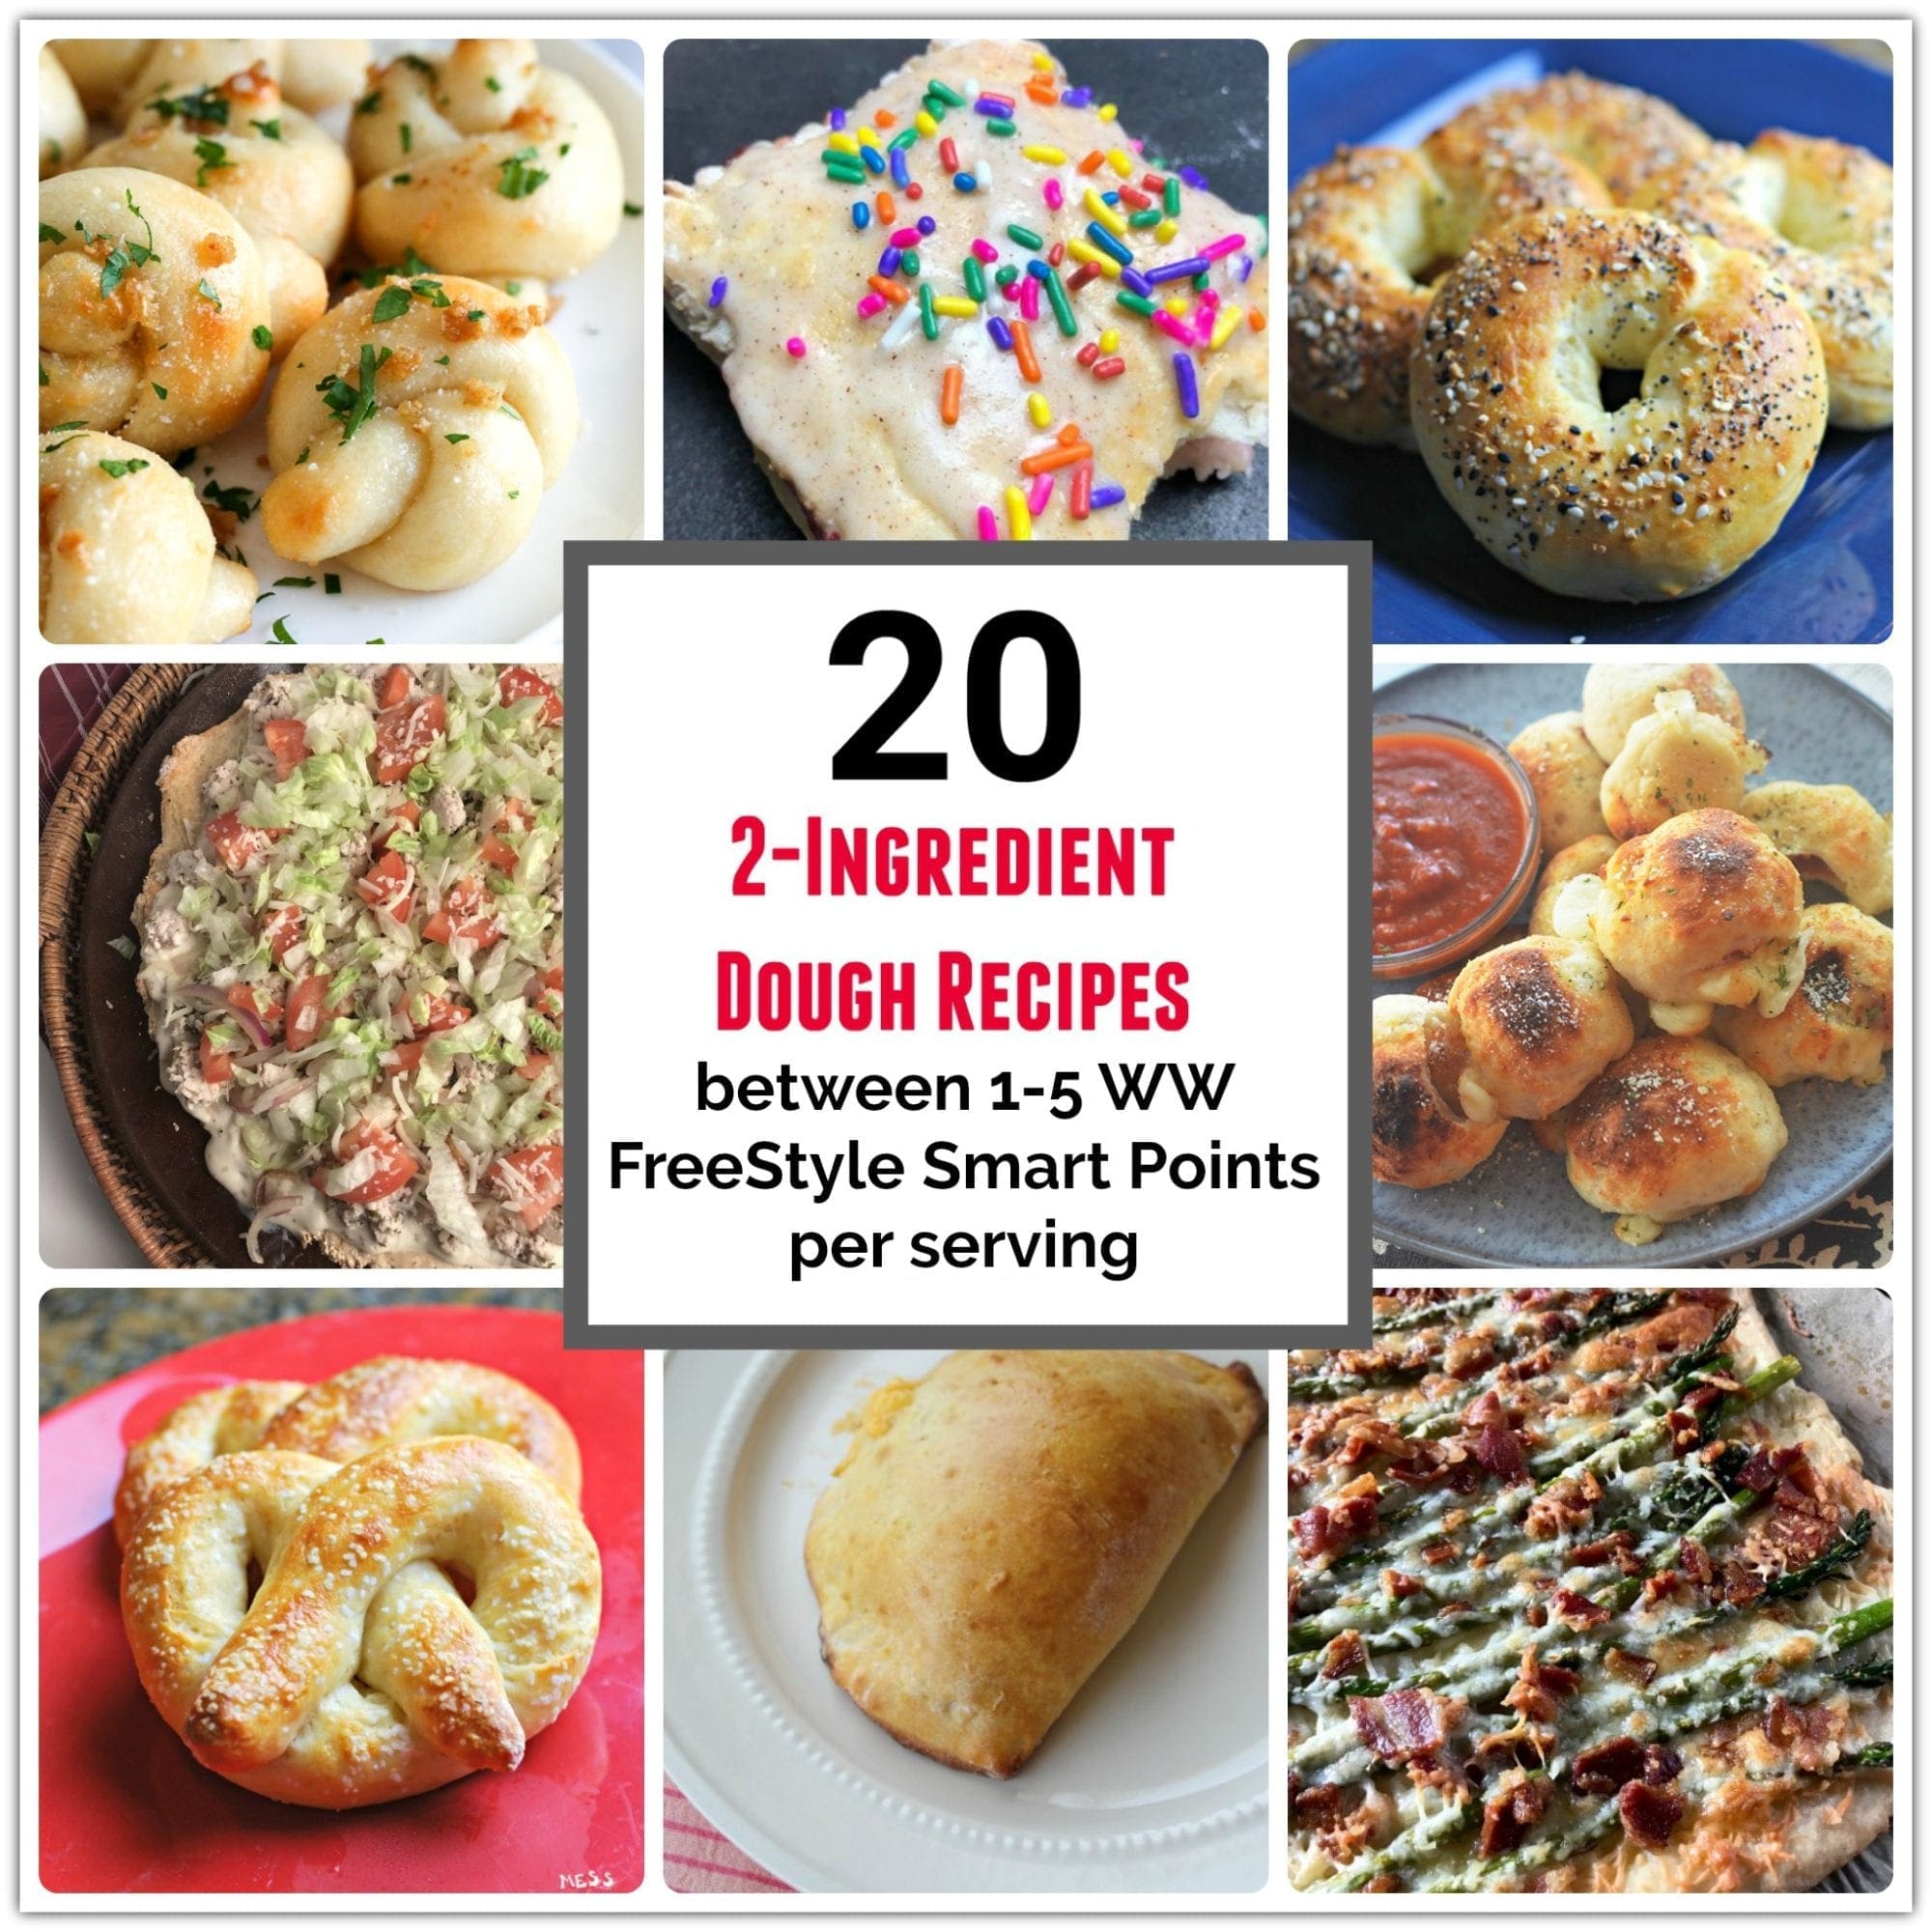 2-Ingredient dough recipes that are between 1-5 WW FreeStyle SmartPoints per serving.